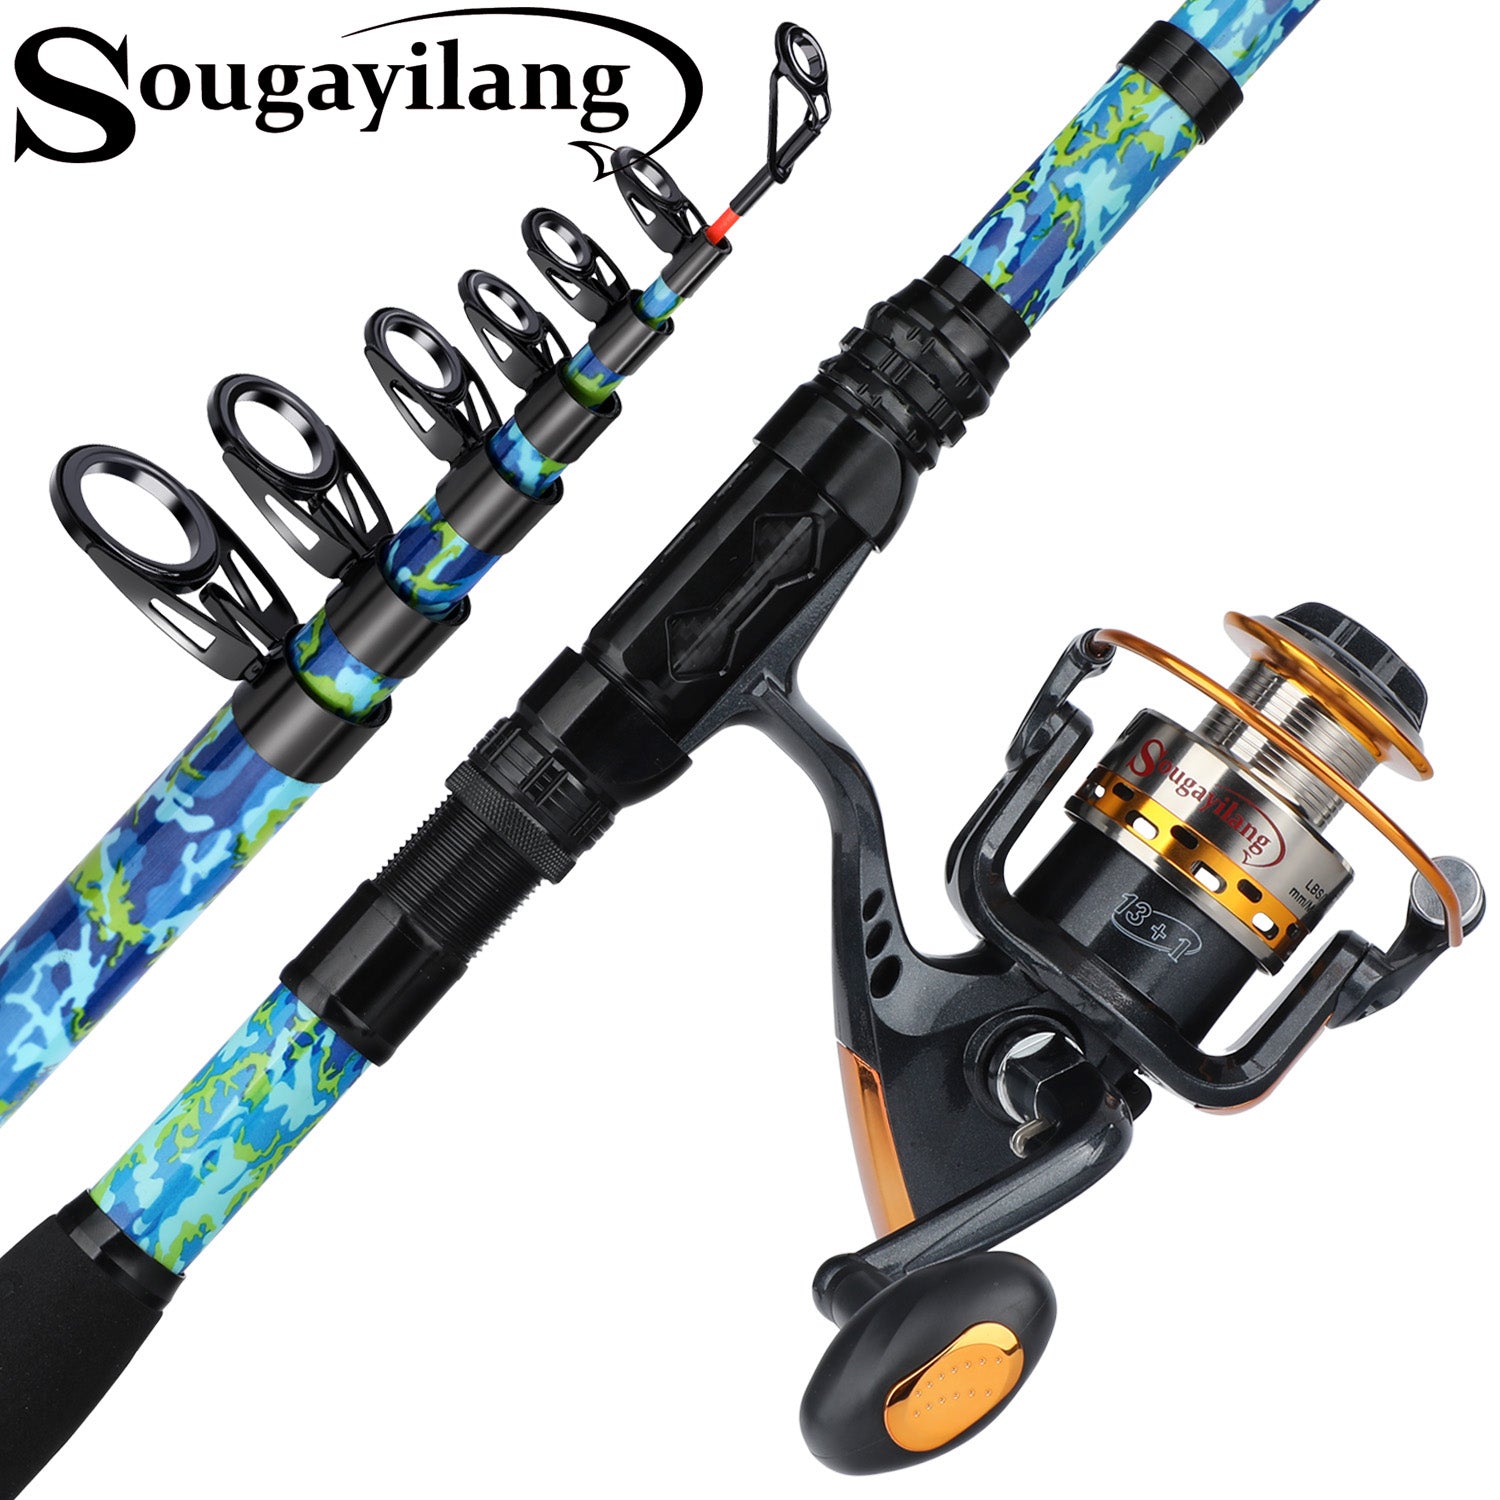 Sougayilang 1.8m 2.1m Spinning Fishing Rods and Reel Set with